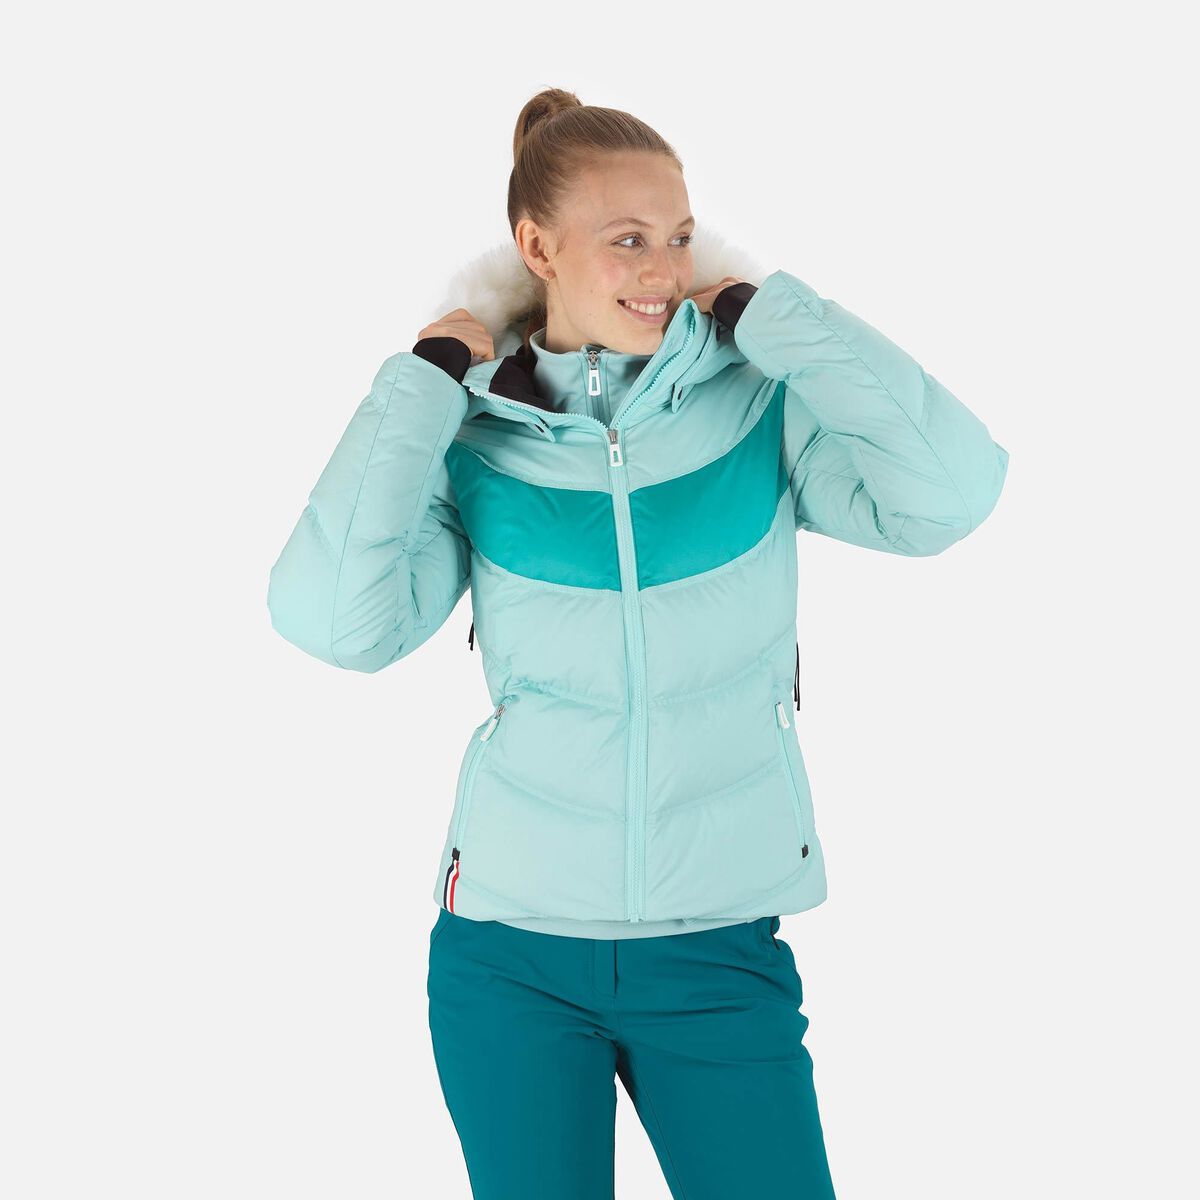 Women's stretch polyester ski jacket with detachable hood